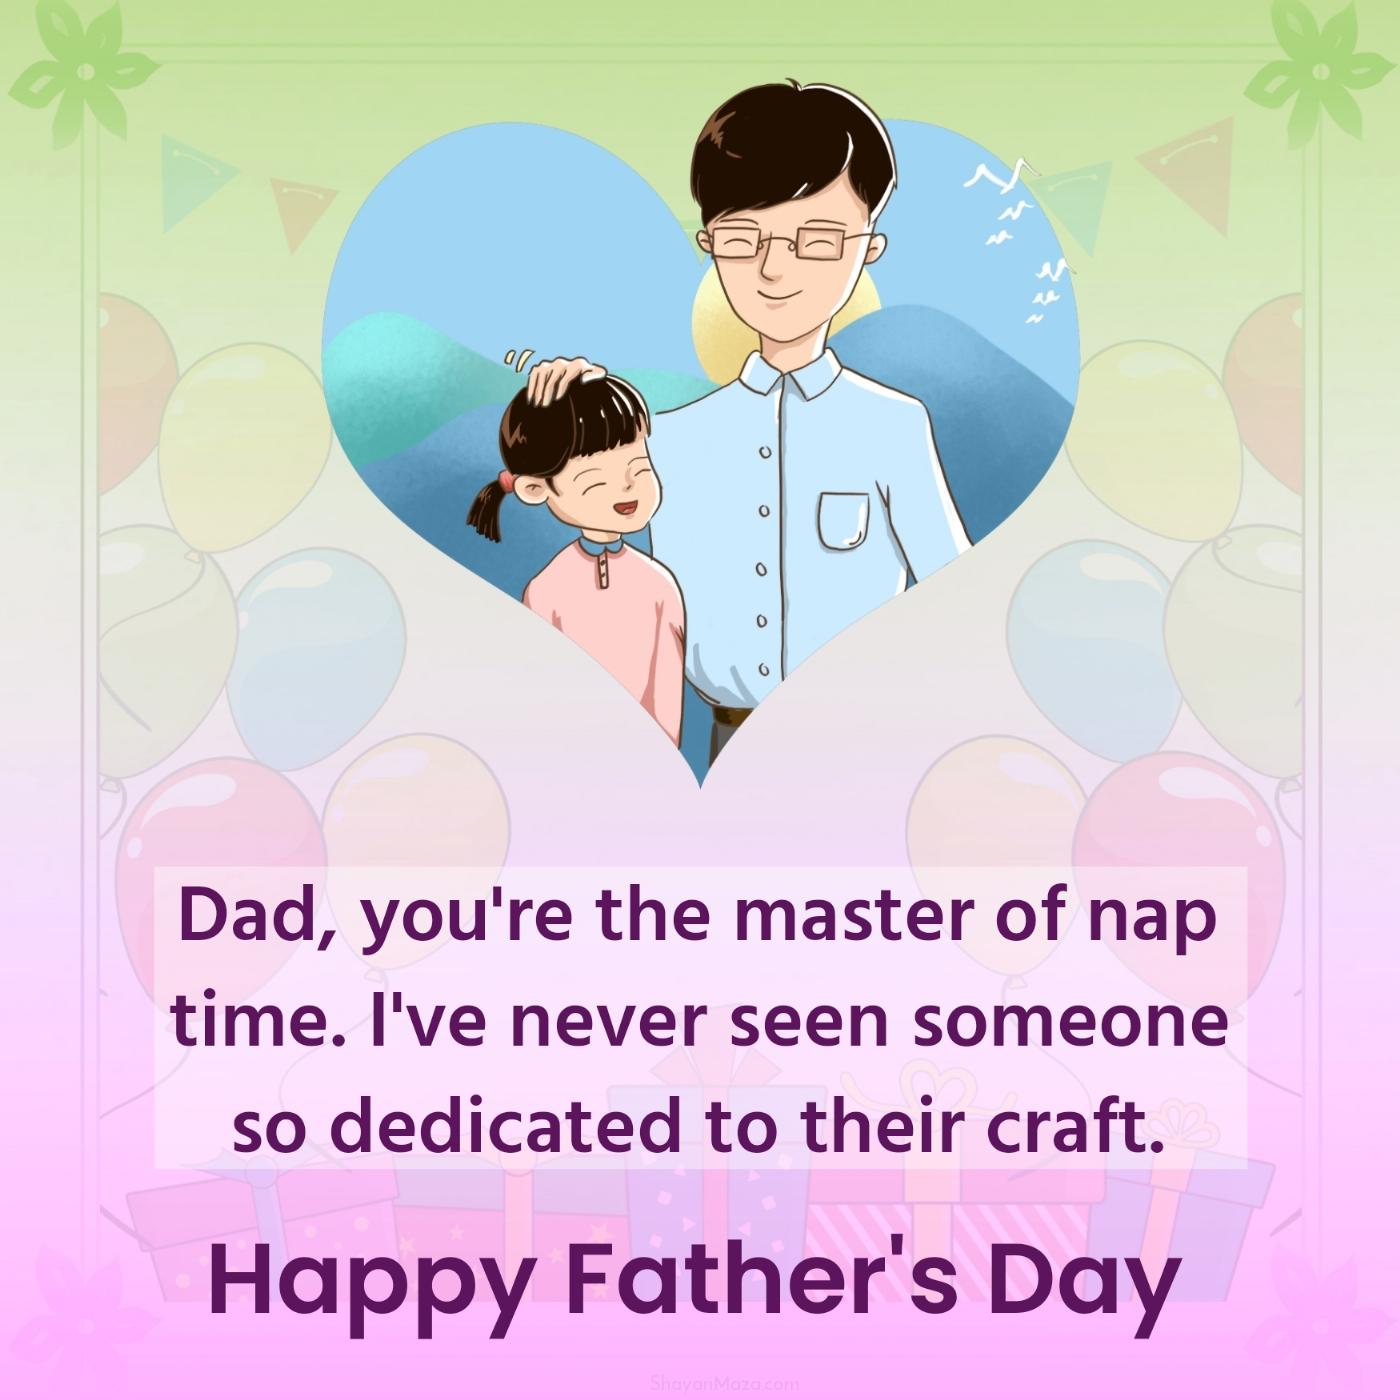 Dad you're the master of nap time